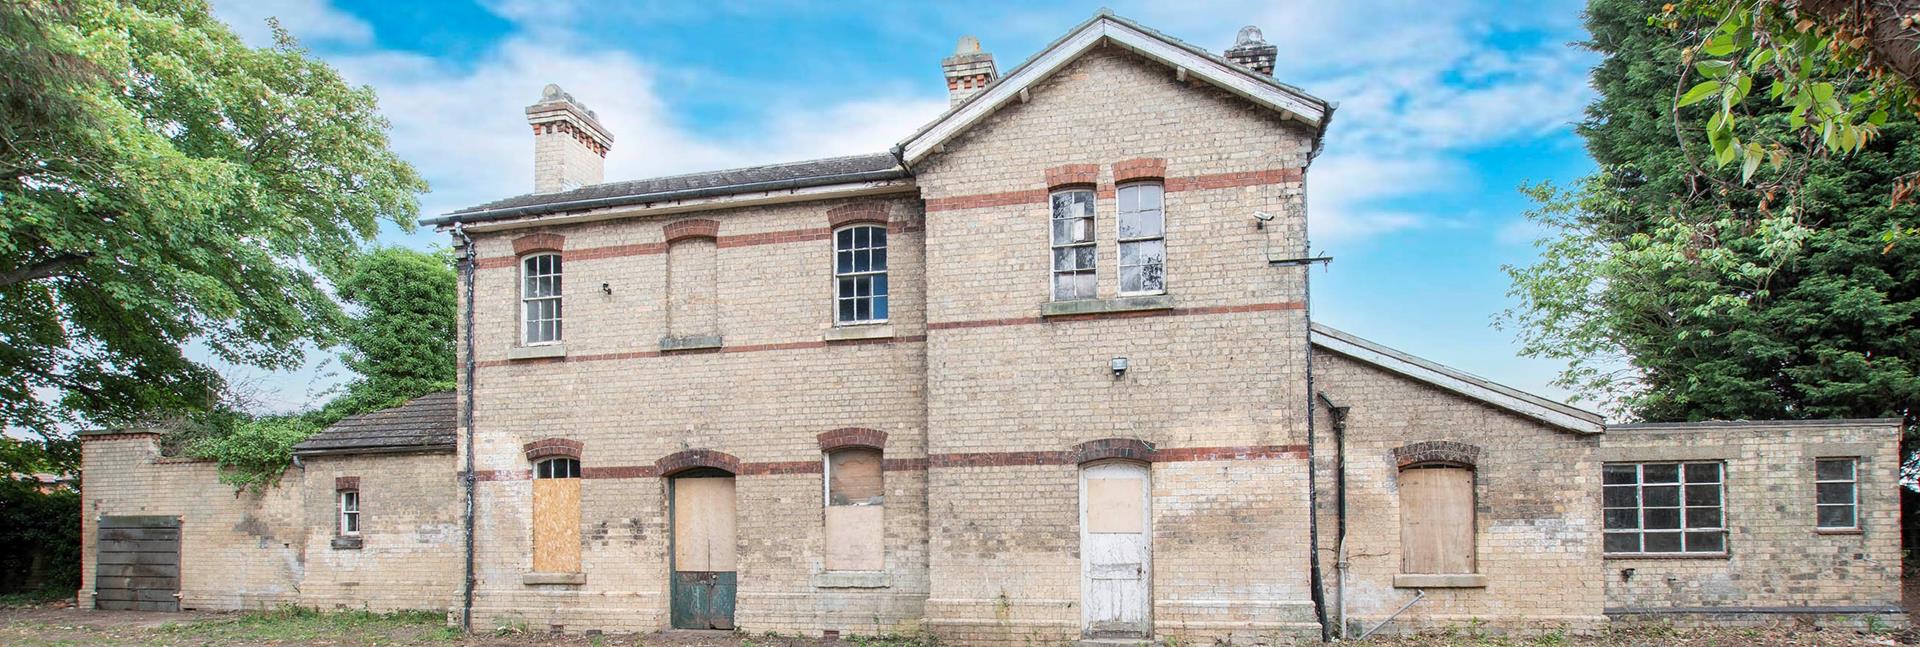 Memories of a 'Railway Child' as Station House on sale